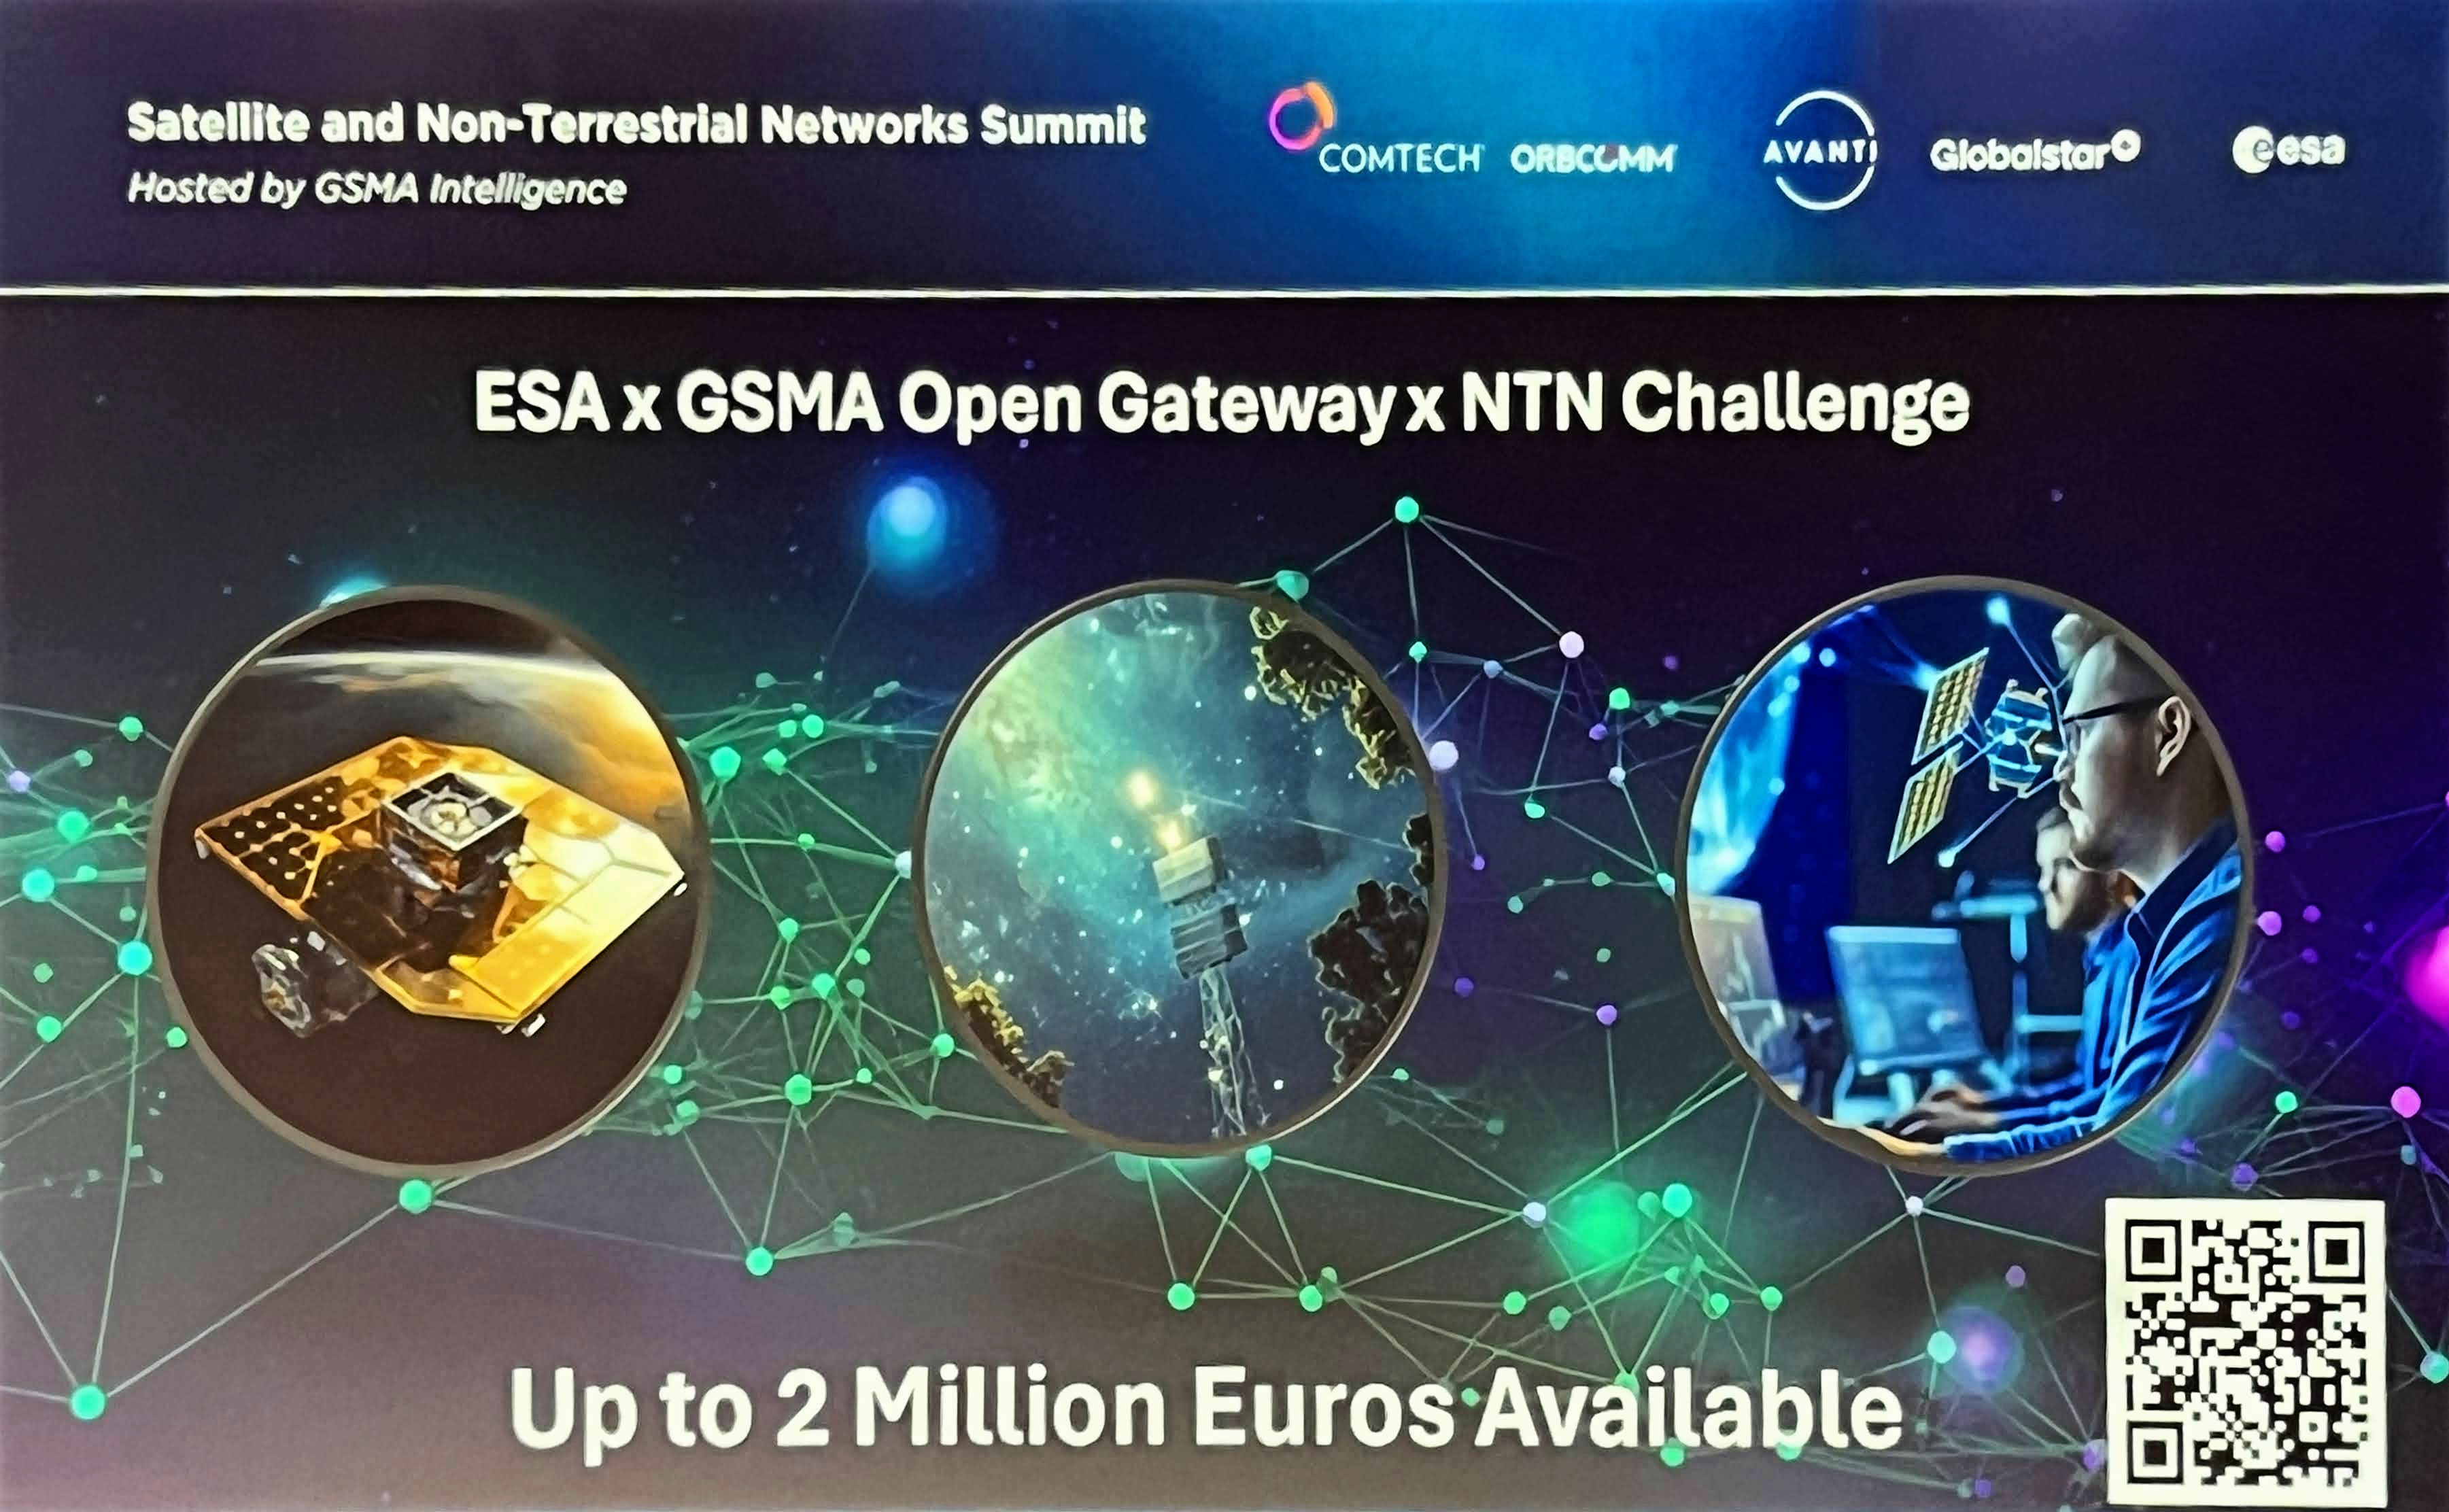 A presentation slide for the ESA x GSMA Open Gateway x NTN Challenge at Satellite and Non-Terrestrial Networks Summit, highlighting a 2 million Euros prize, with logos of sponsors and a QR code.